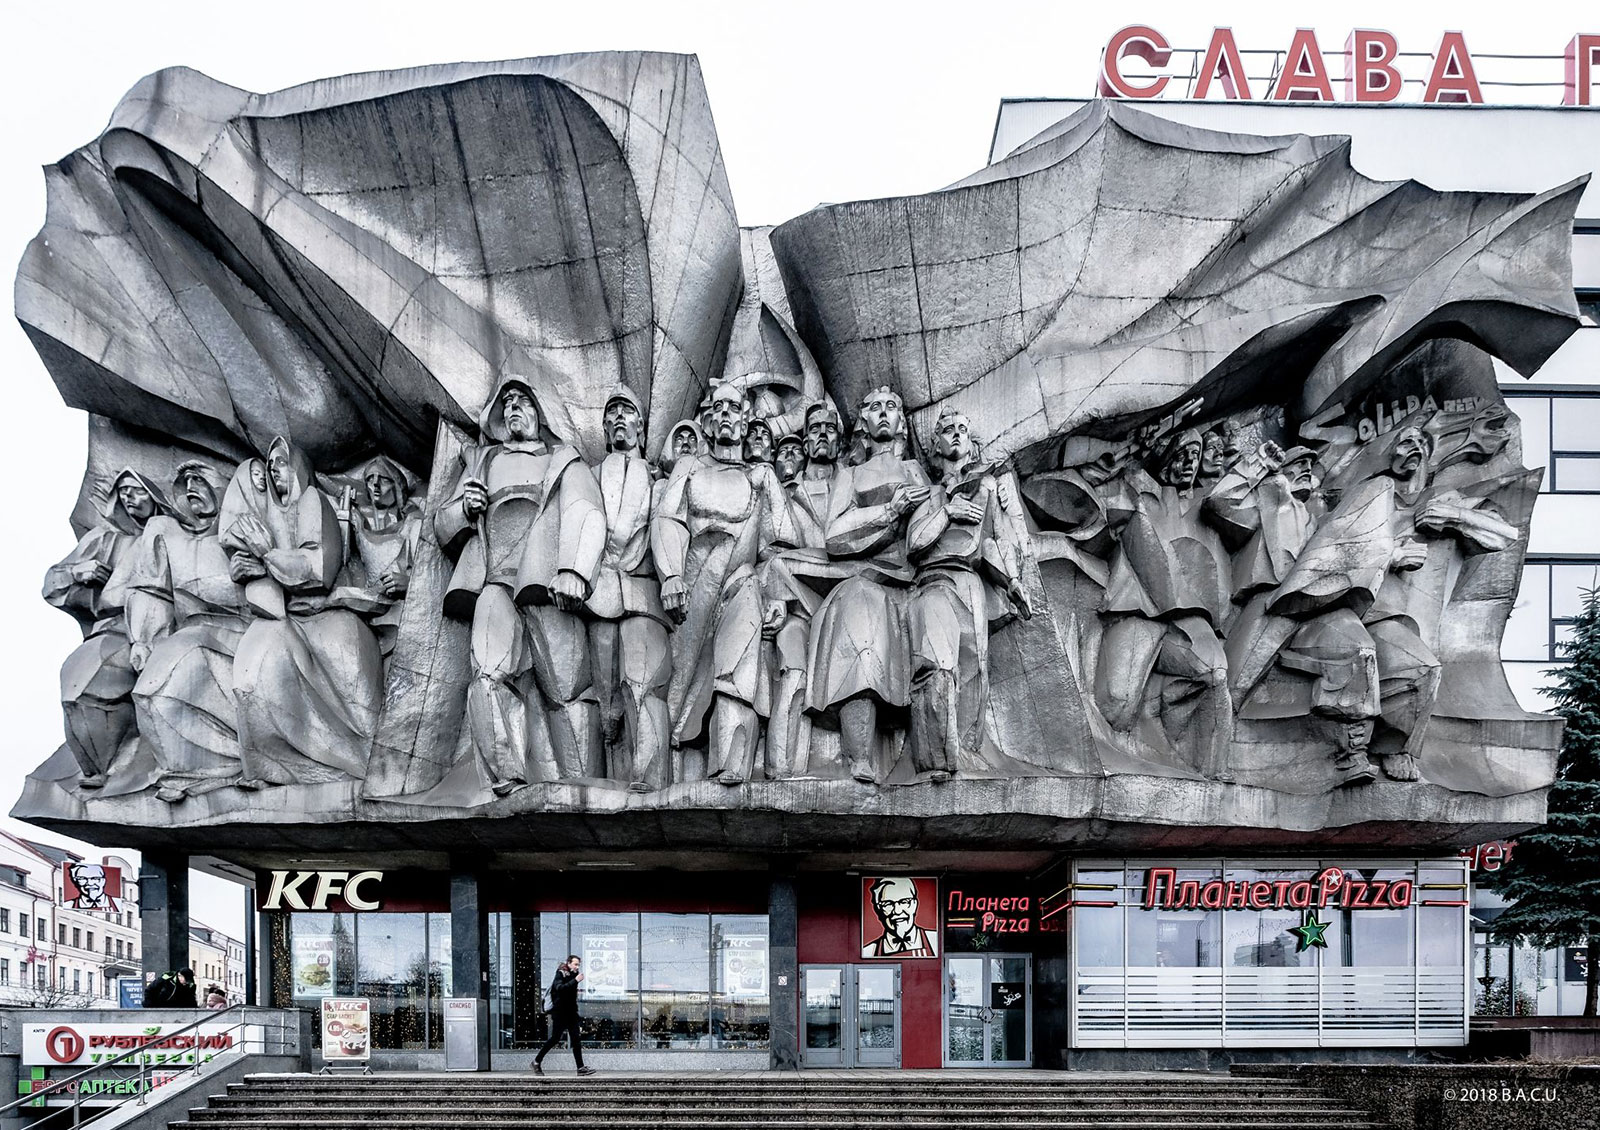 The other Odesa: hunting for socialist-modernist architectural gems in Ukraine’s maritime city